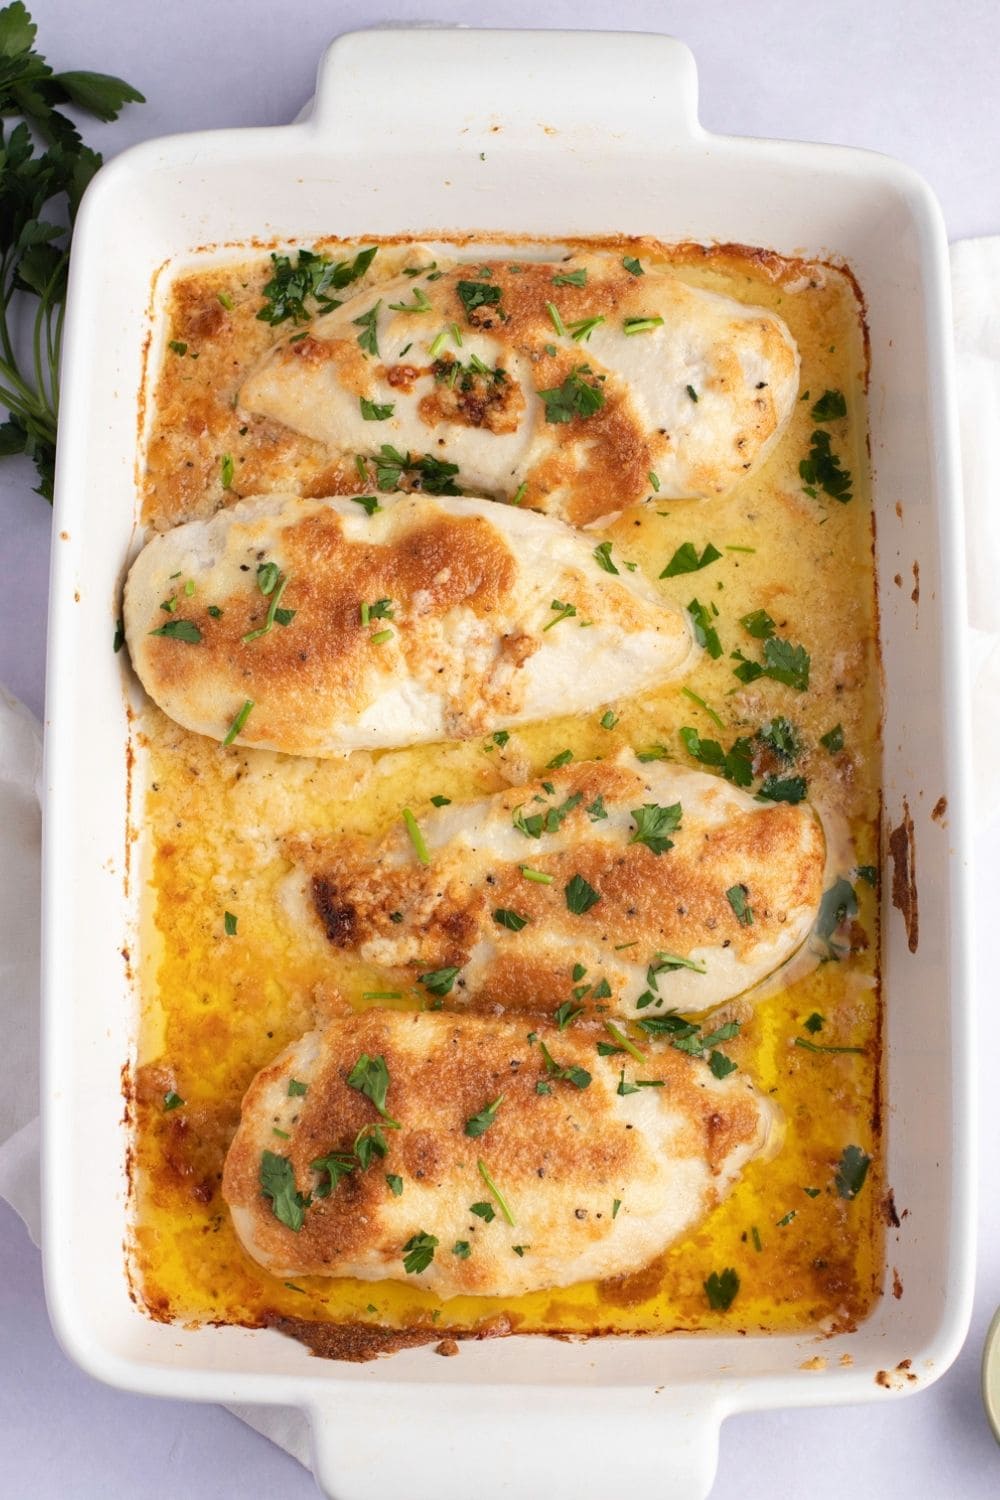 Chicken breast with a cheesy sauce garnished with chopped parsley leaves on a casserole dish.